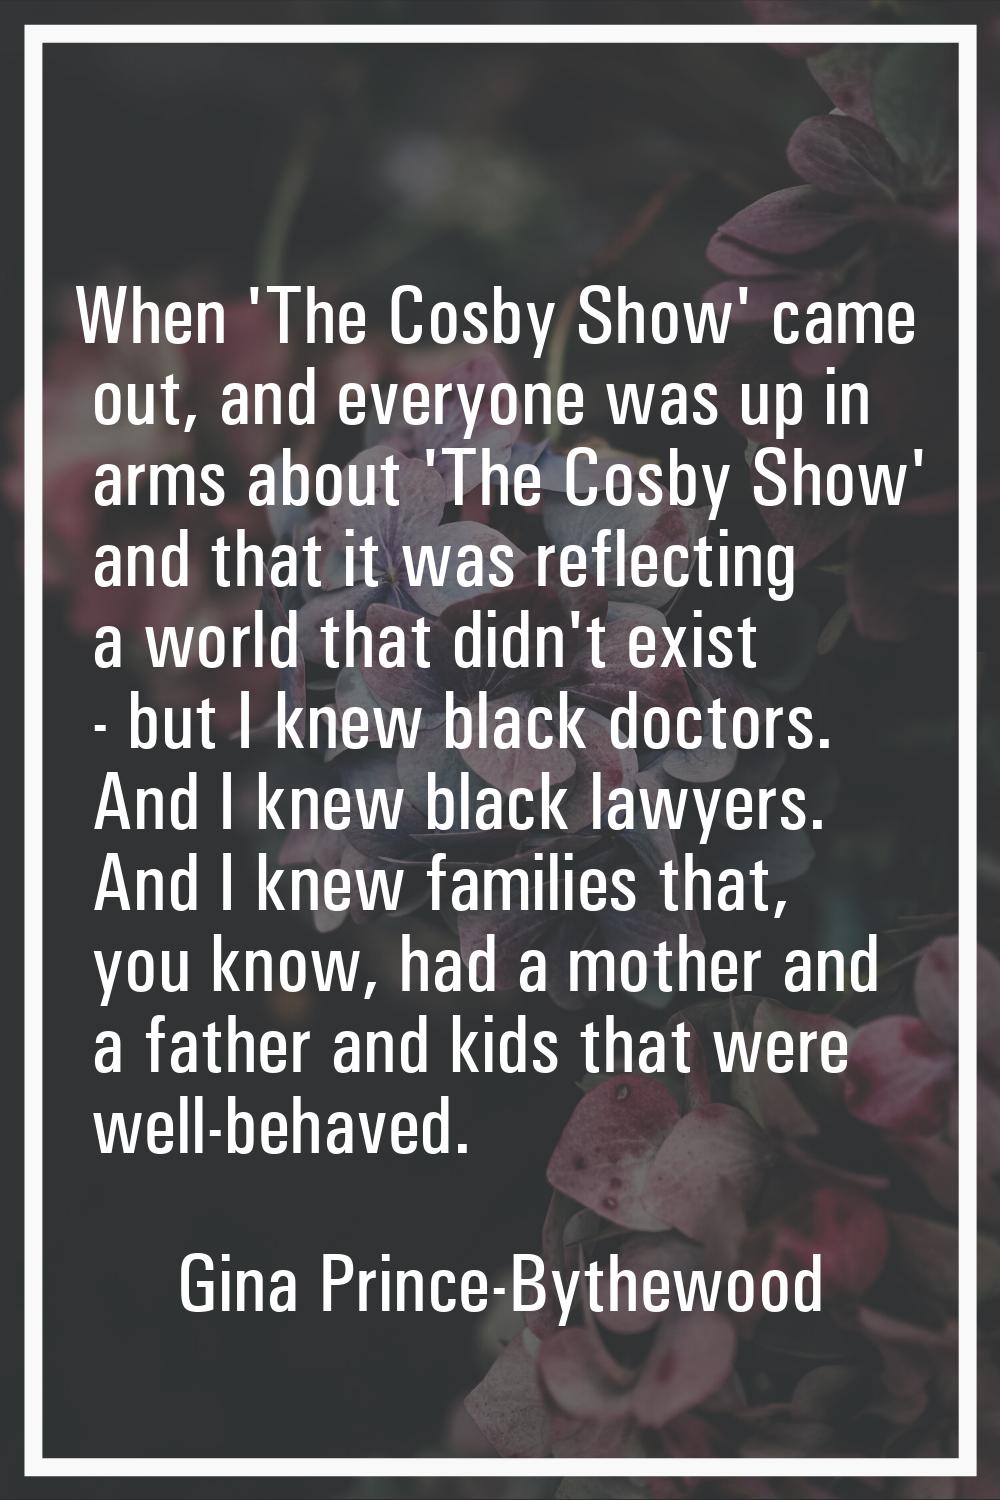 When 'The Cosby Show' came out, and everyone was up in arms about 'The Cosby Show' and that it was 